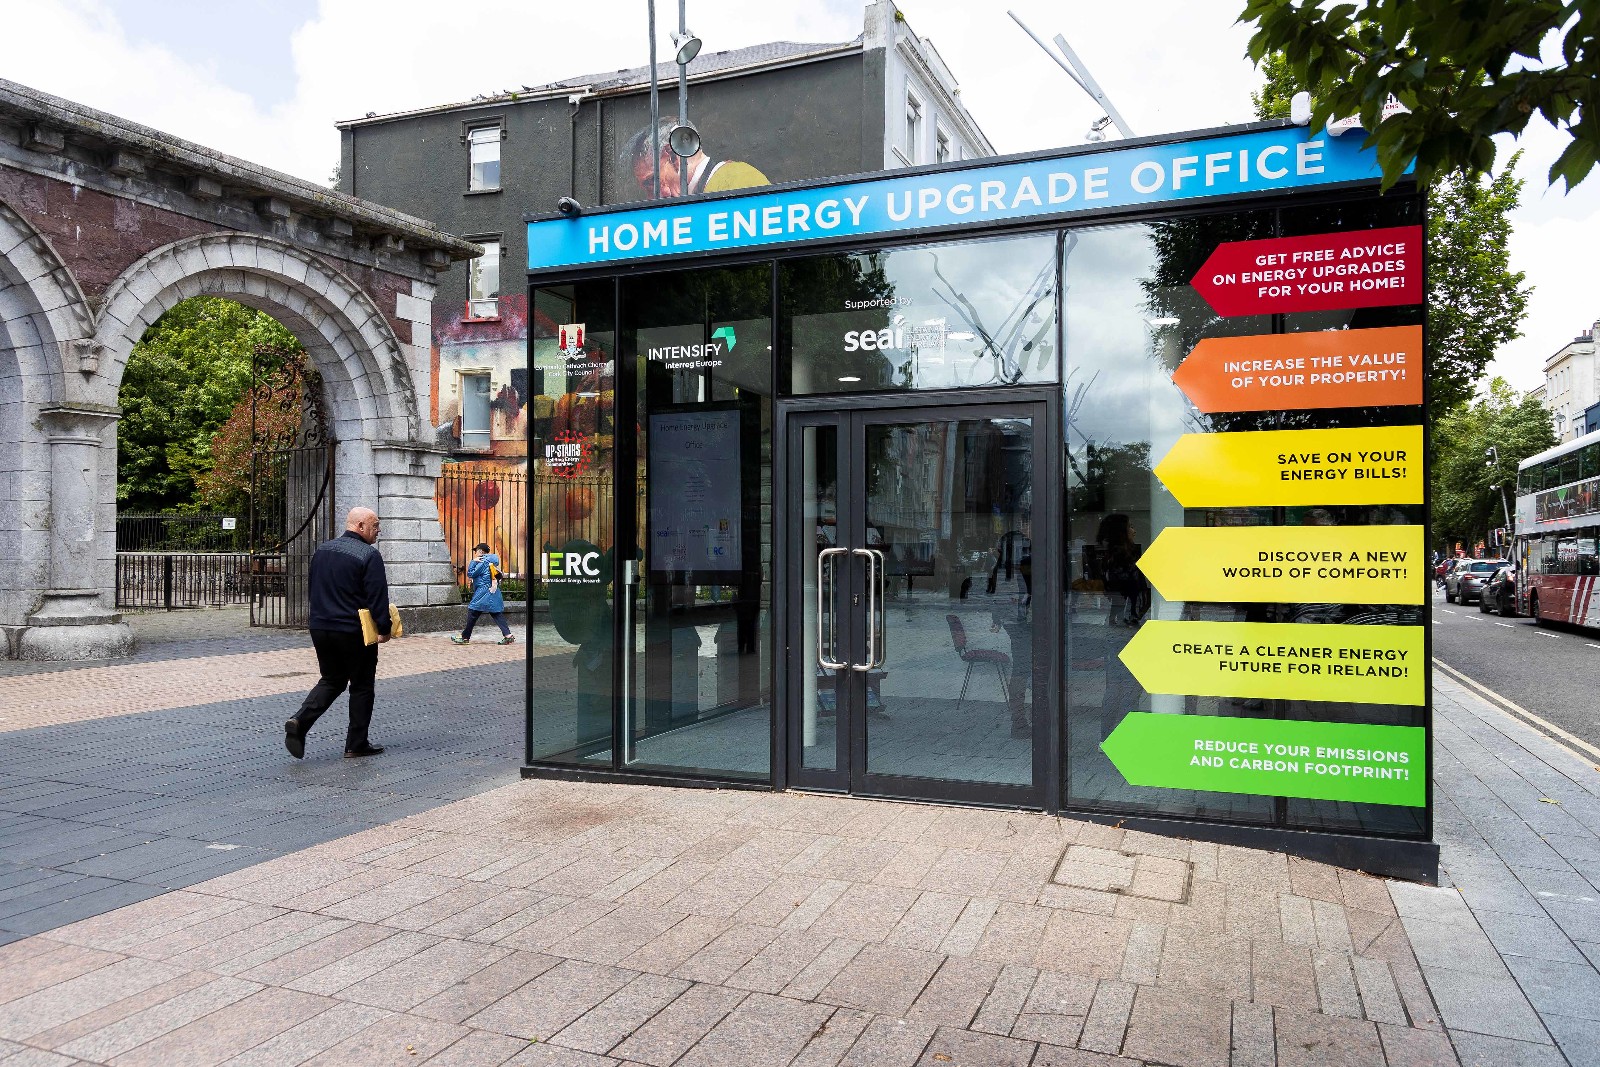 The Home Energy Upgrade Office on Grand Parade